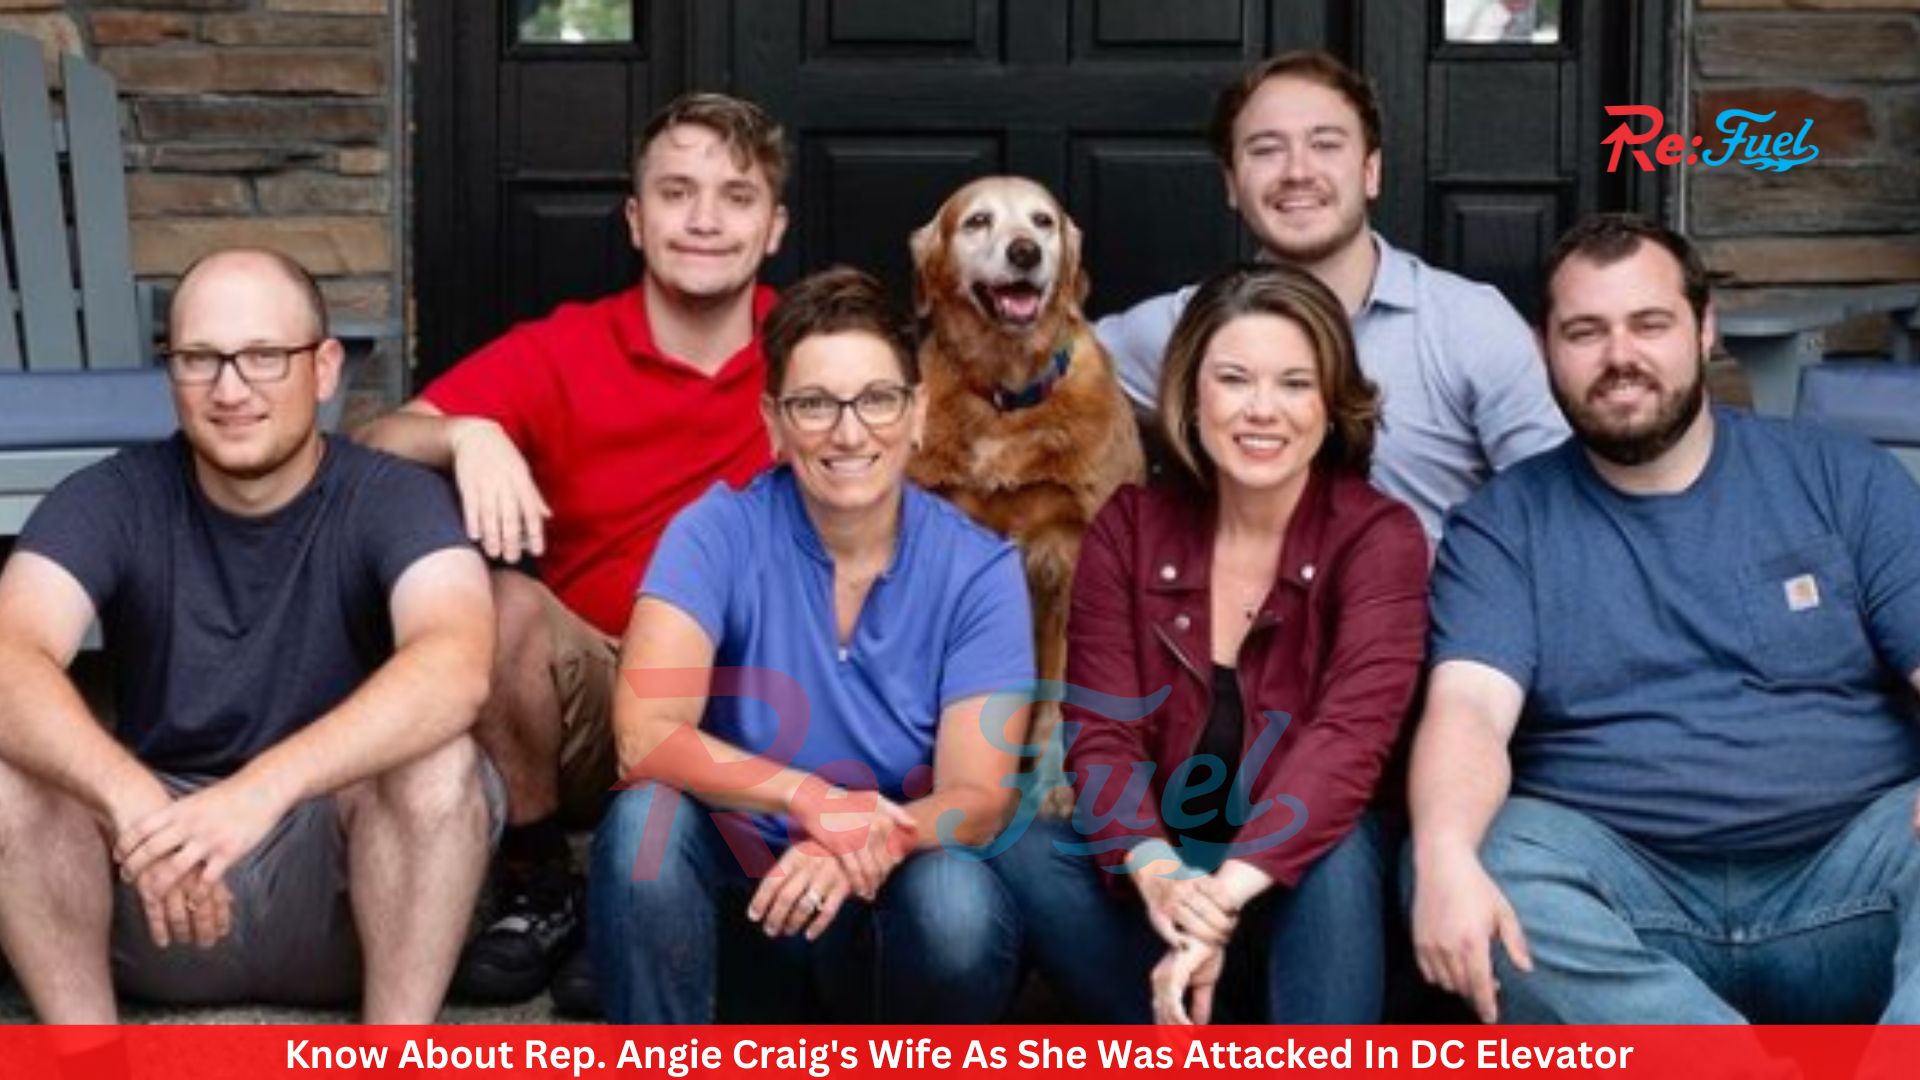 Know About Rep. Angie Craig's Wife As She Was Attacked In DC Elevator